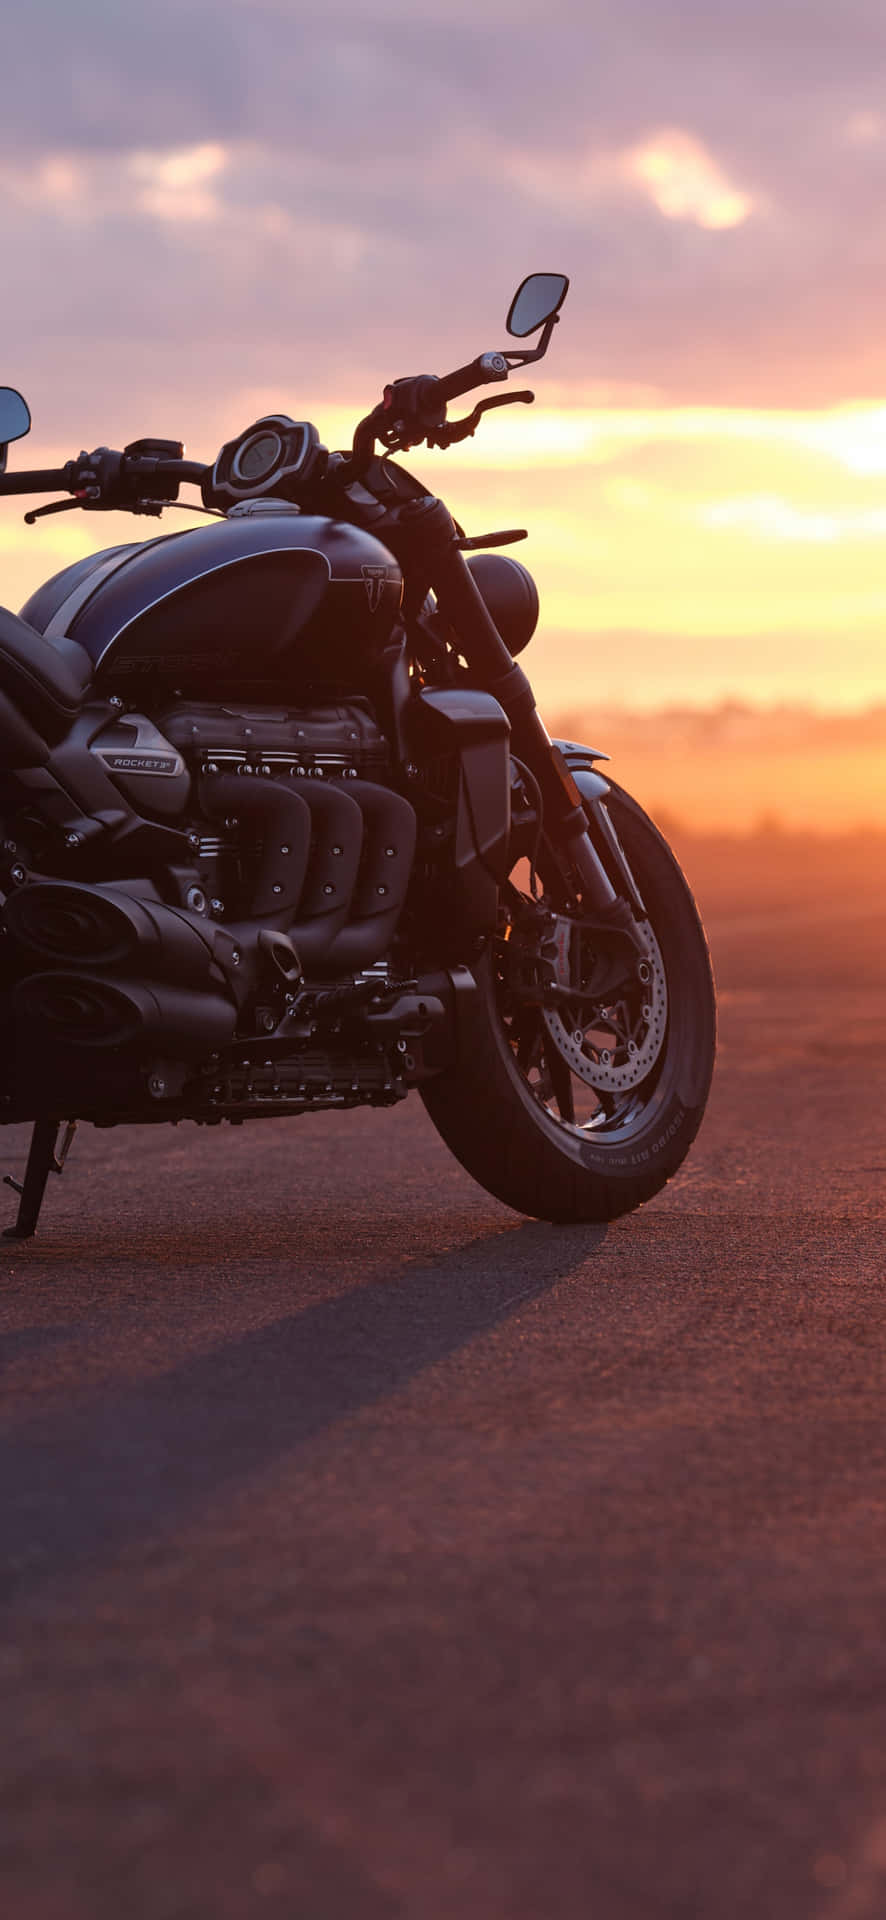 Motorcycle Sunset Silhouette Wallpaper